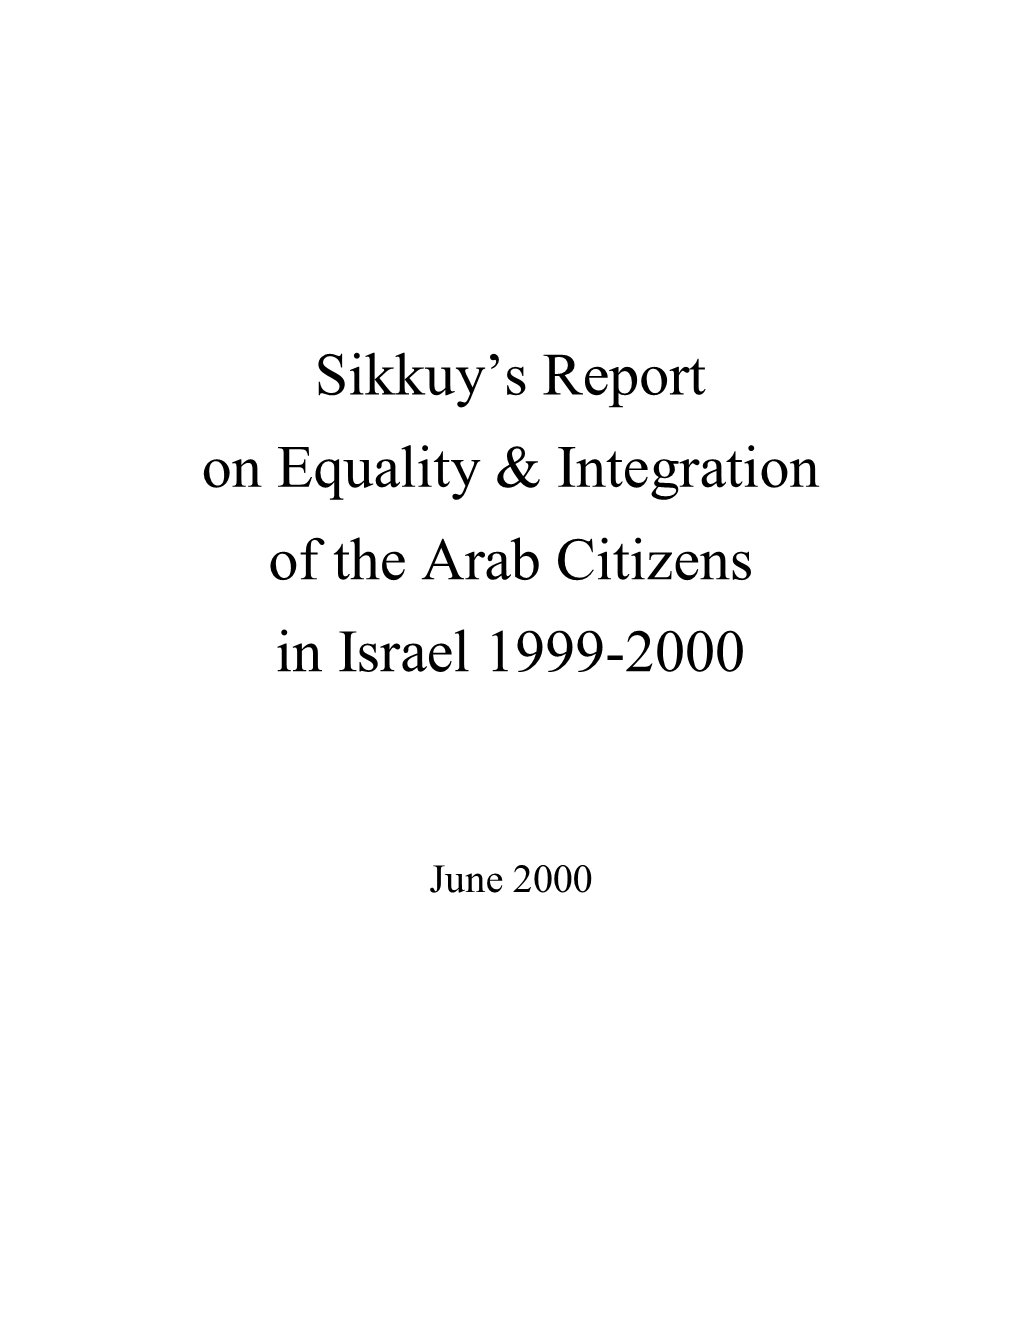 Sikkuy's Report on Equality & Integration of the Arab Citizens in Israel 1999-2000